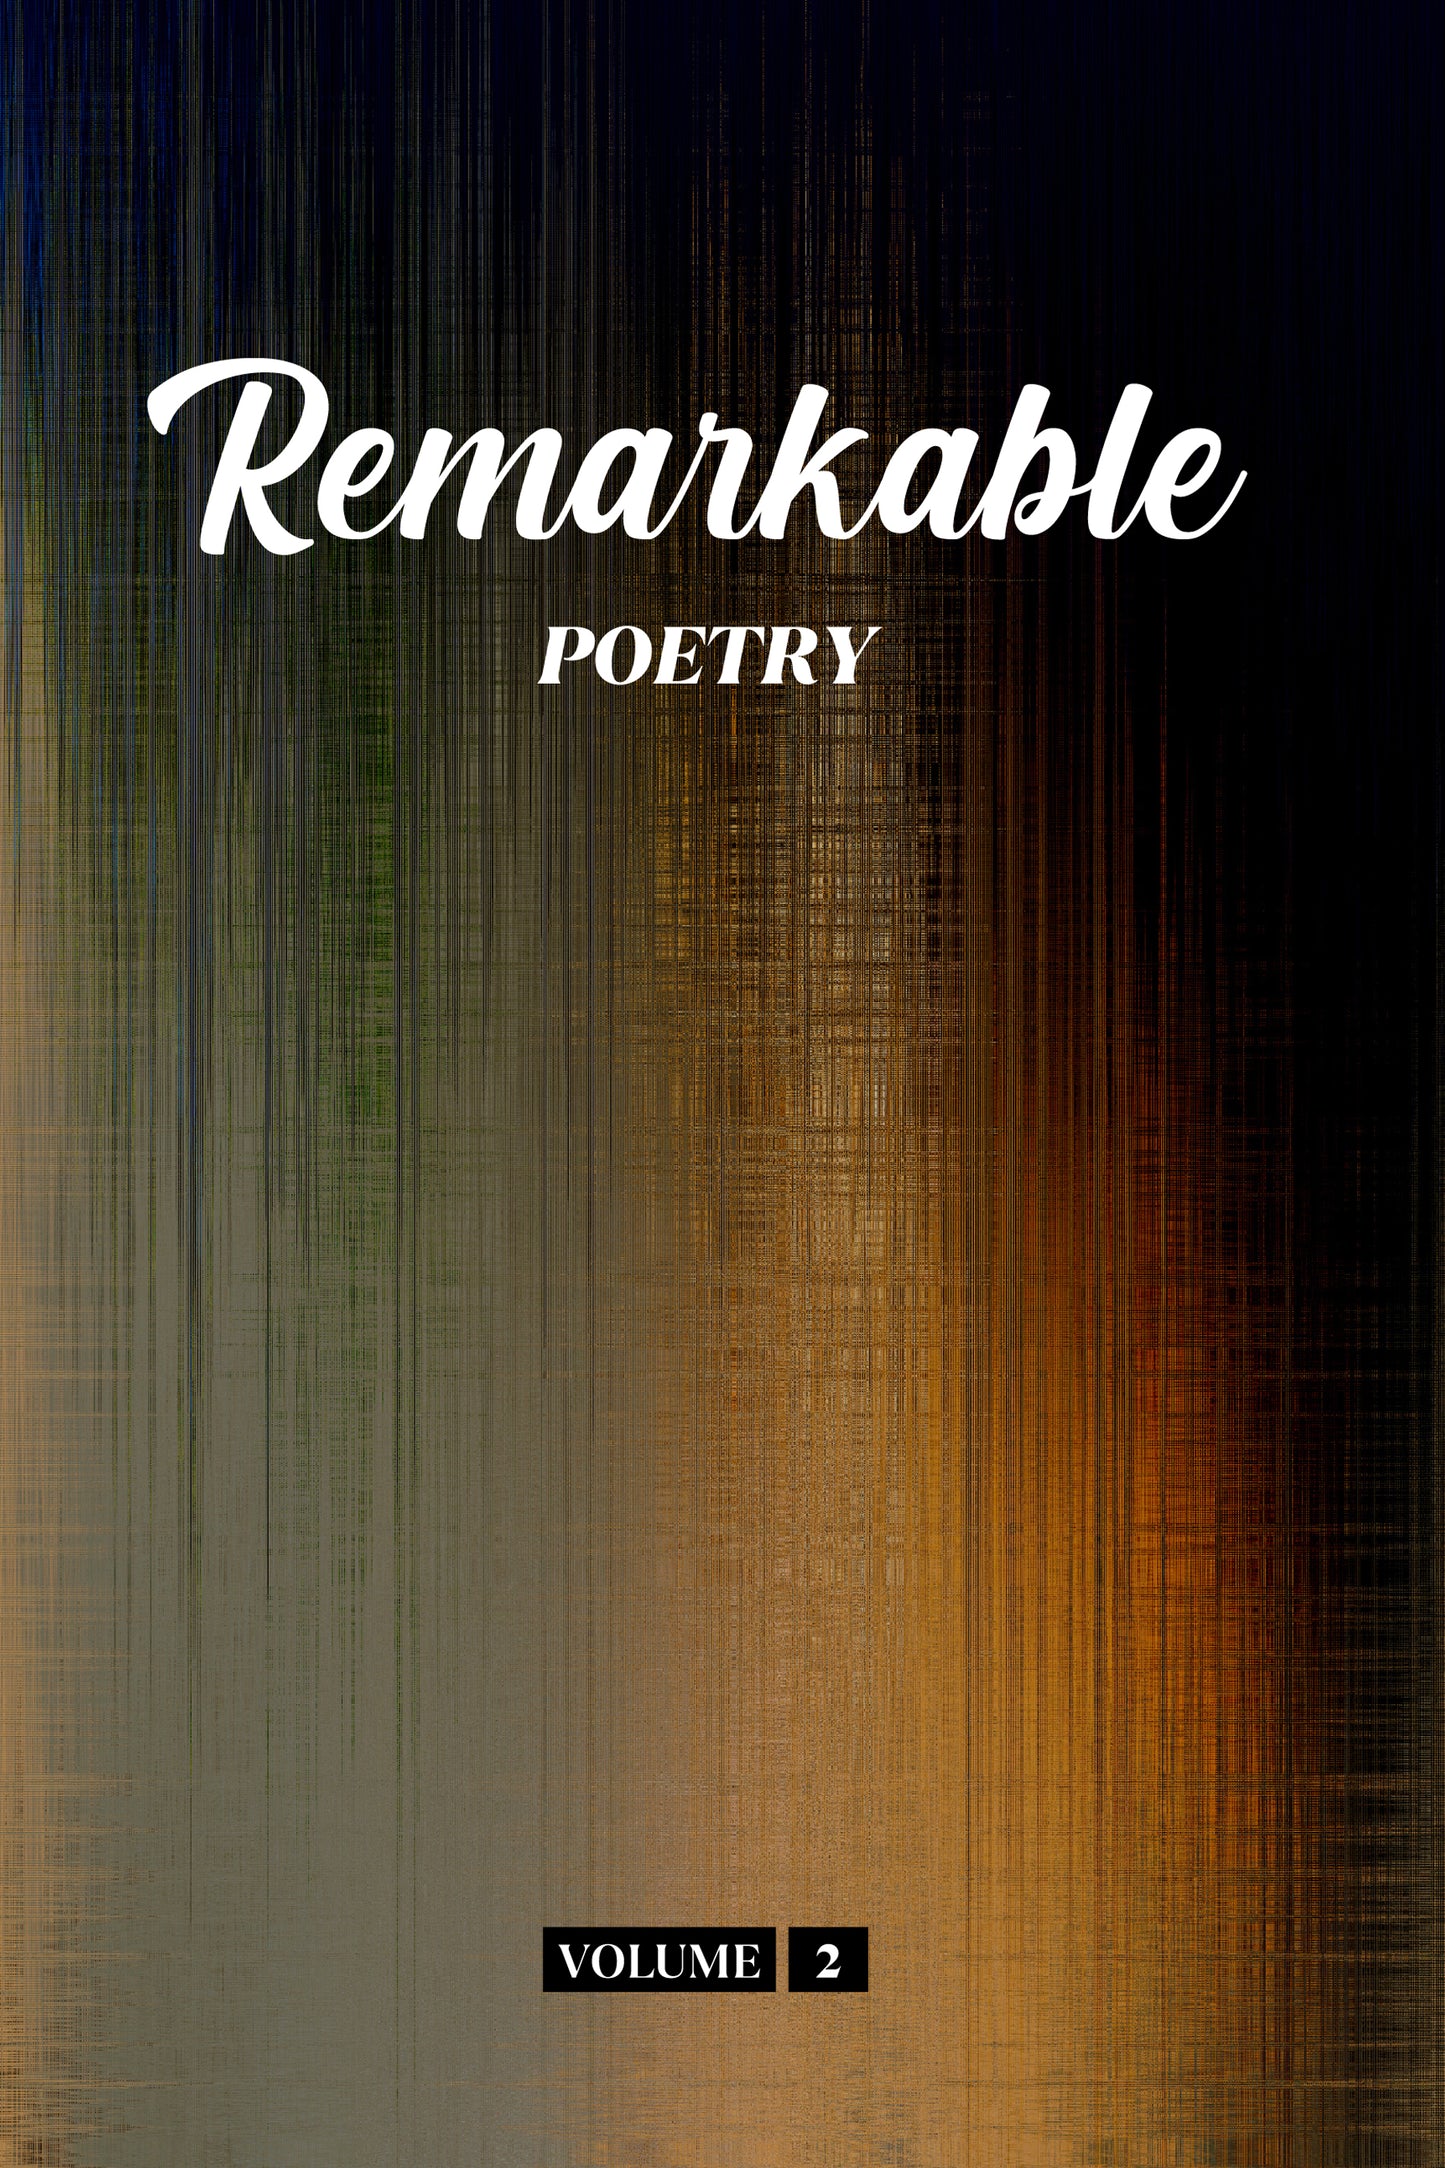 Remarkable Poetry (Volume 2) - Physical Book